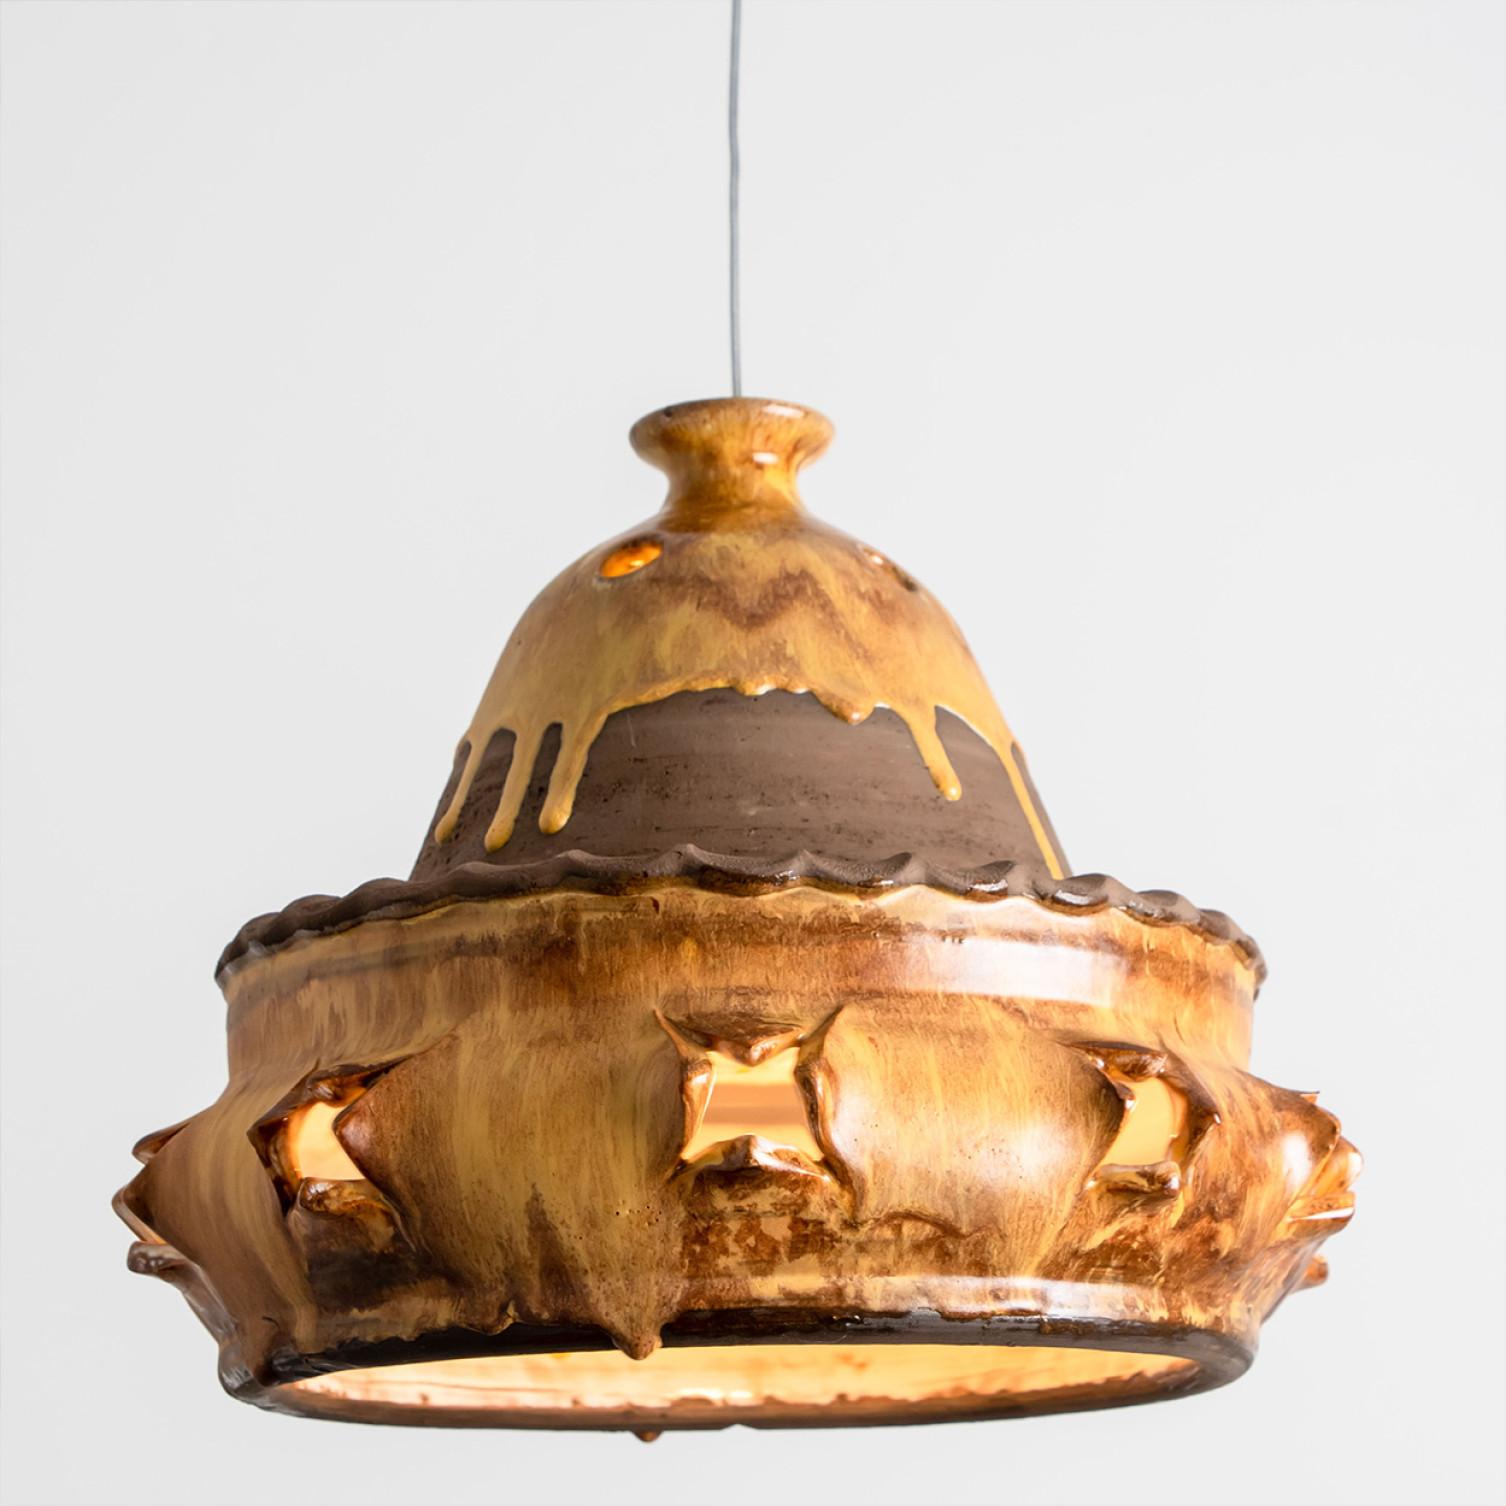 Stunning round hanging lamp with an pie-like shape and design, made with rich terra colored brown ceramics, manufactured in the 1970s in Denmark. We also have a multitude of unique colored ceramic light sets and arrangements, all available on our